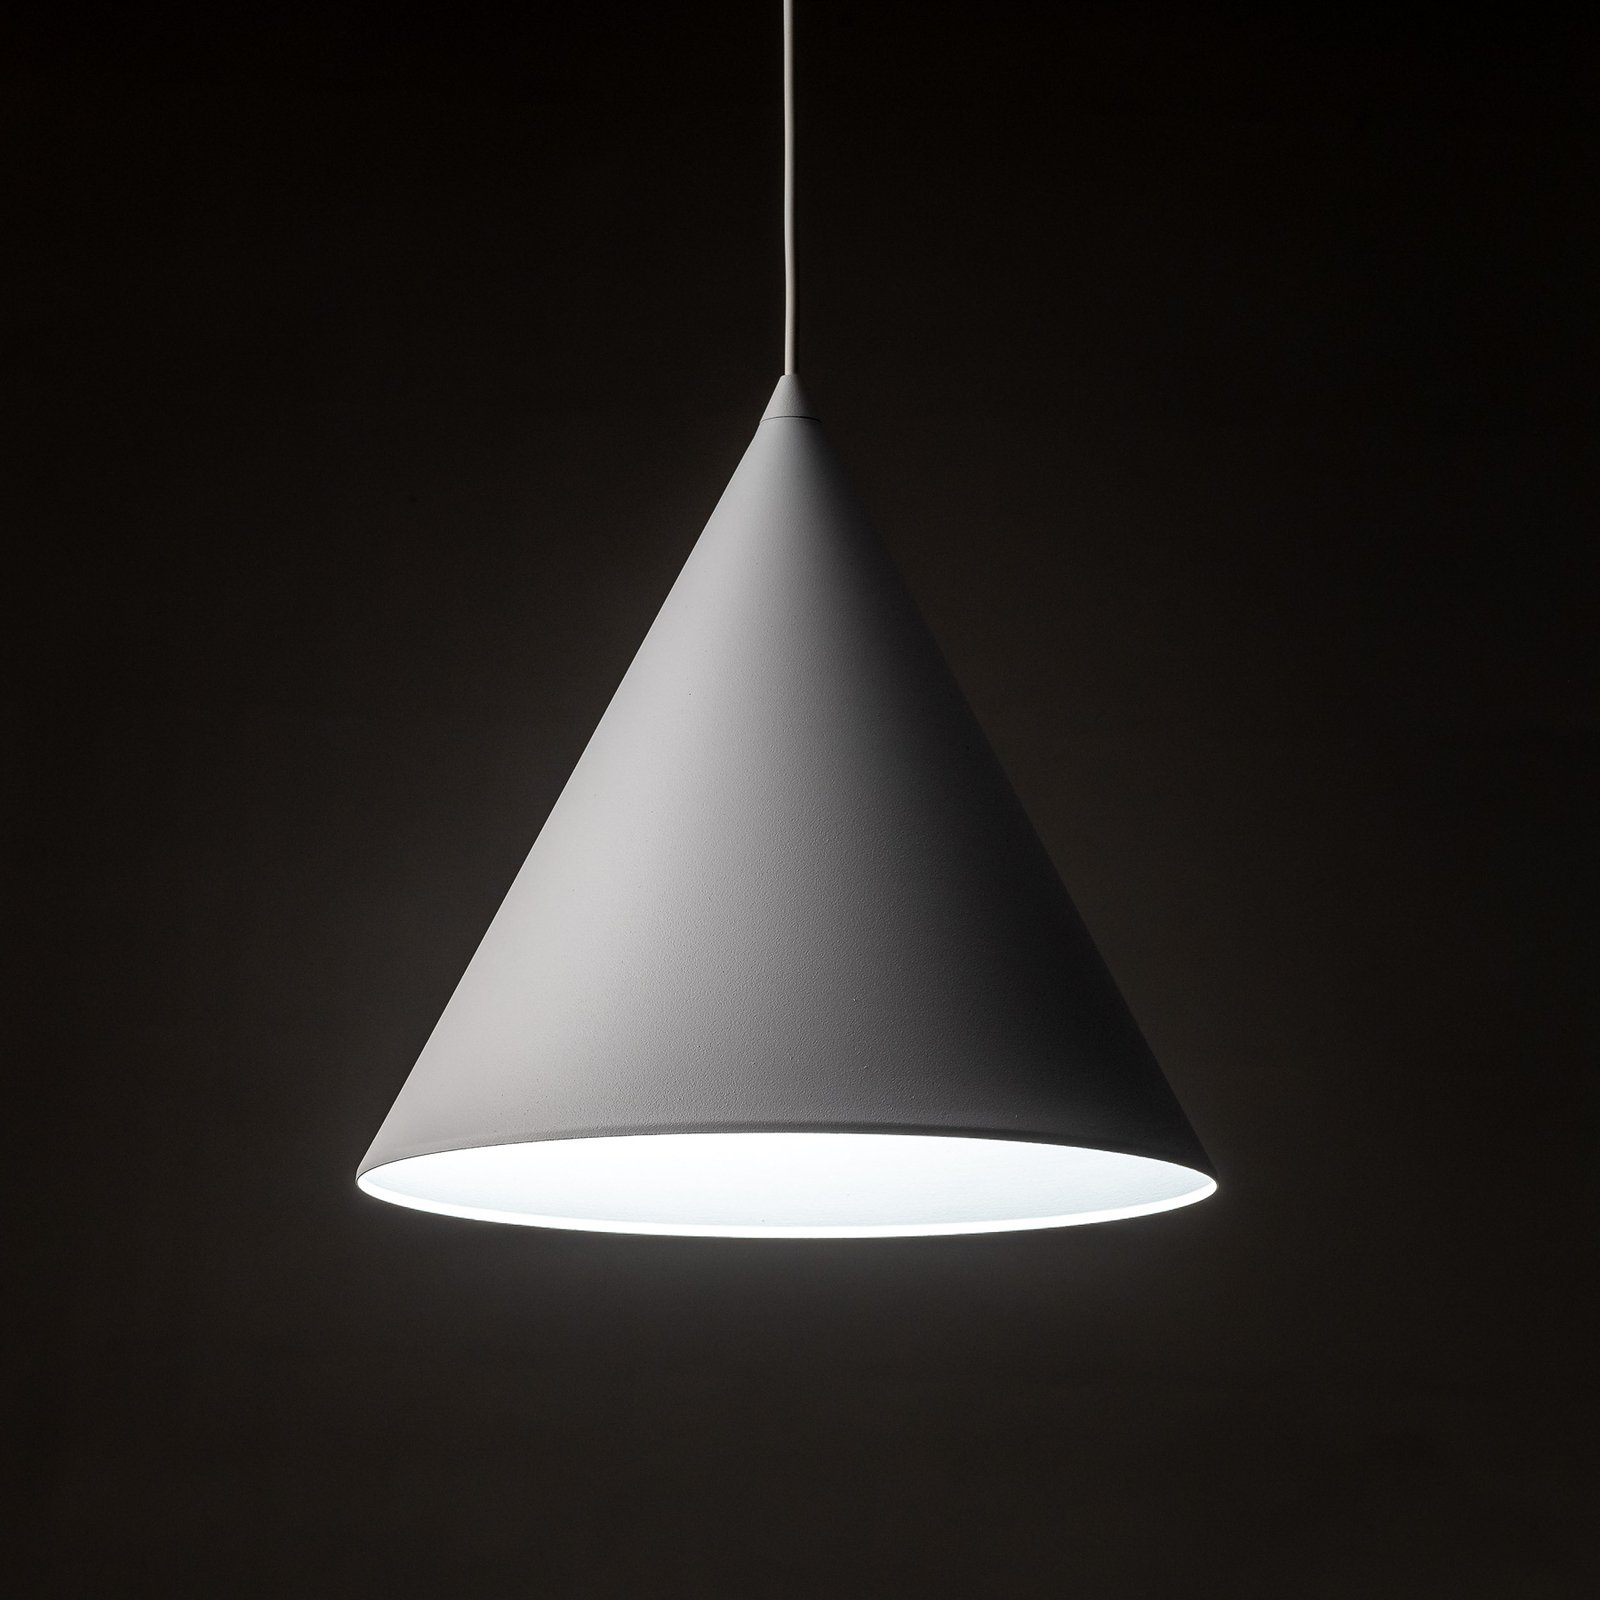 Cono hanglamp, wit, Ø 32 cm, staal, 1-lamp